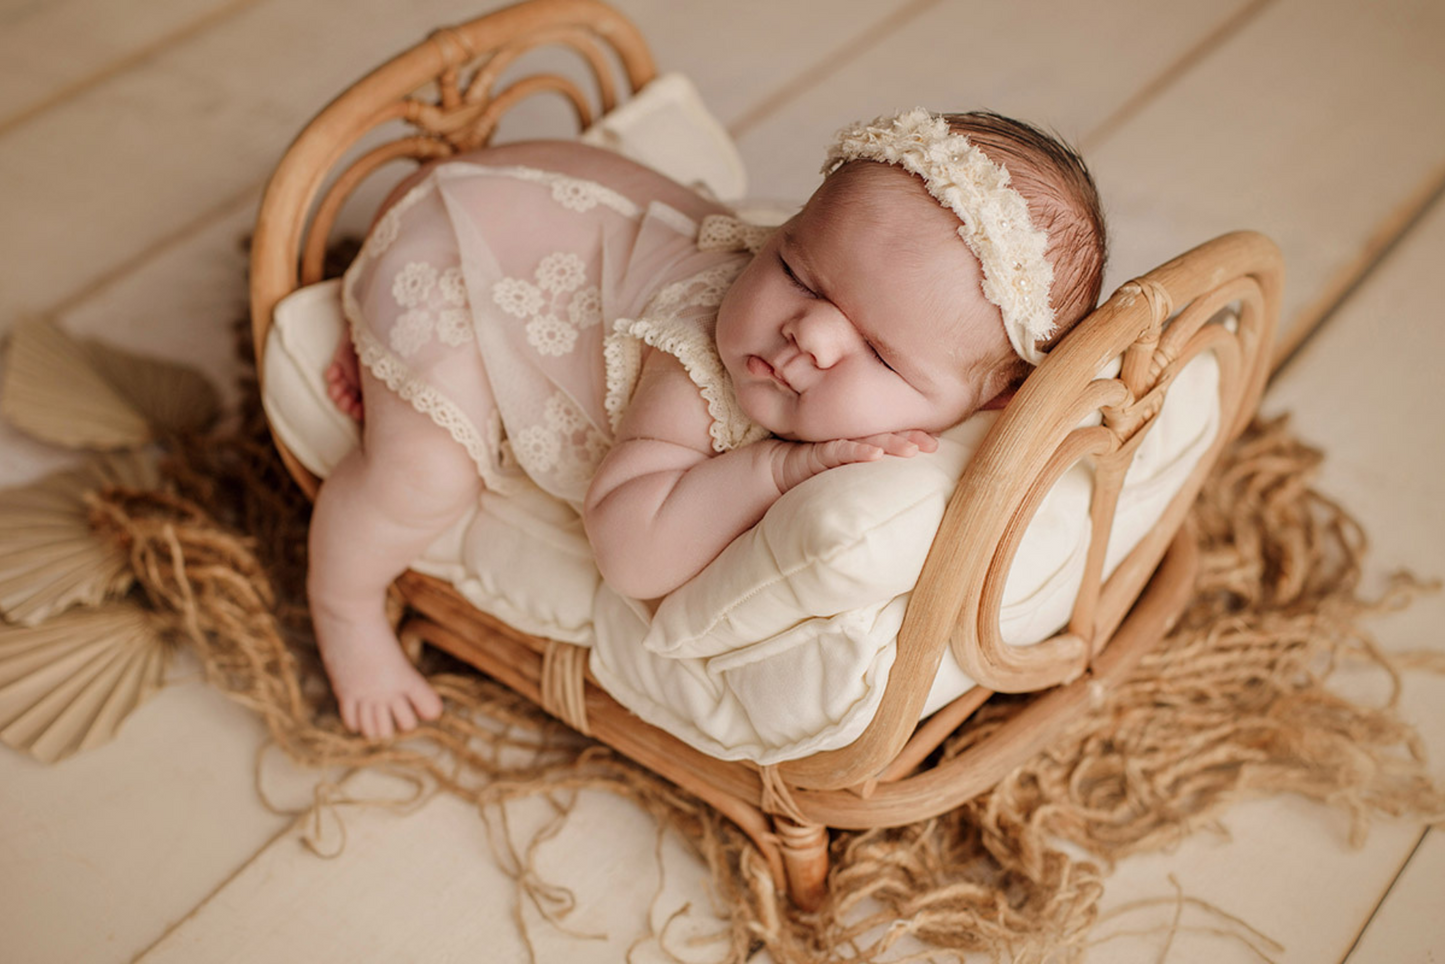 Newborn in a cozy rattan basket with fluffy white blanket, floral headband, and gentle backdrop.